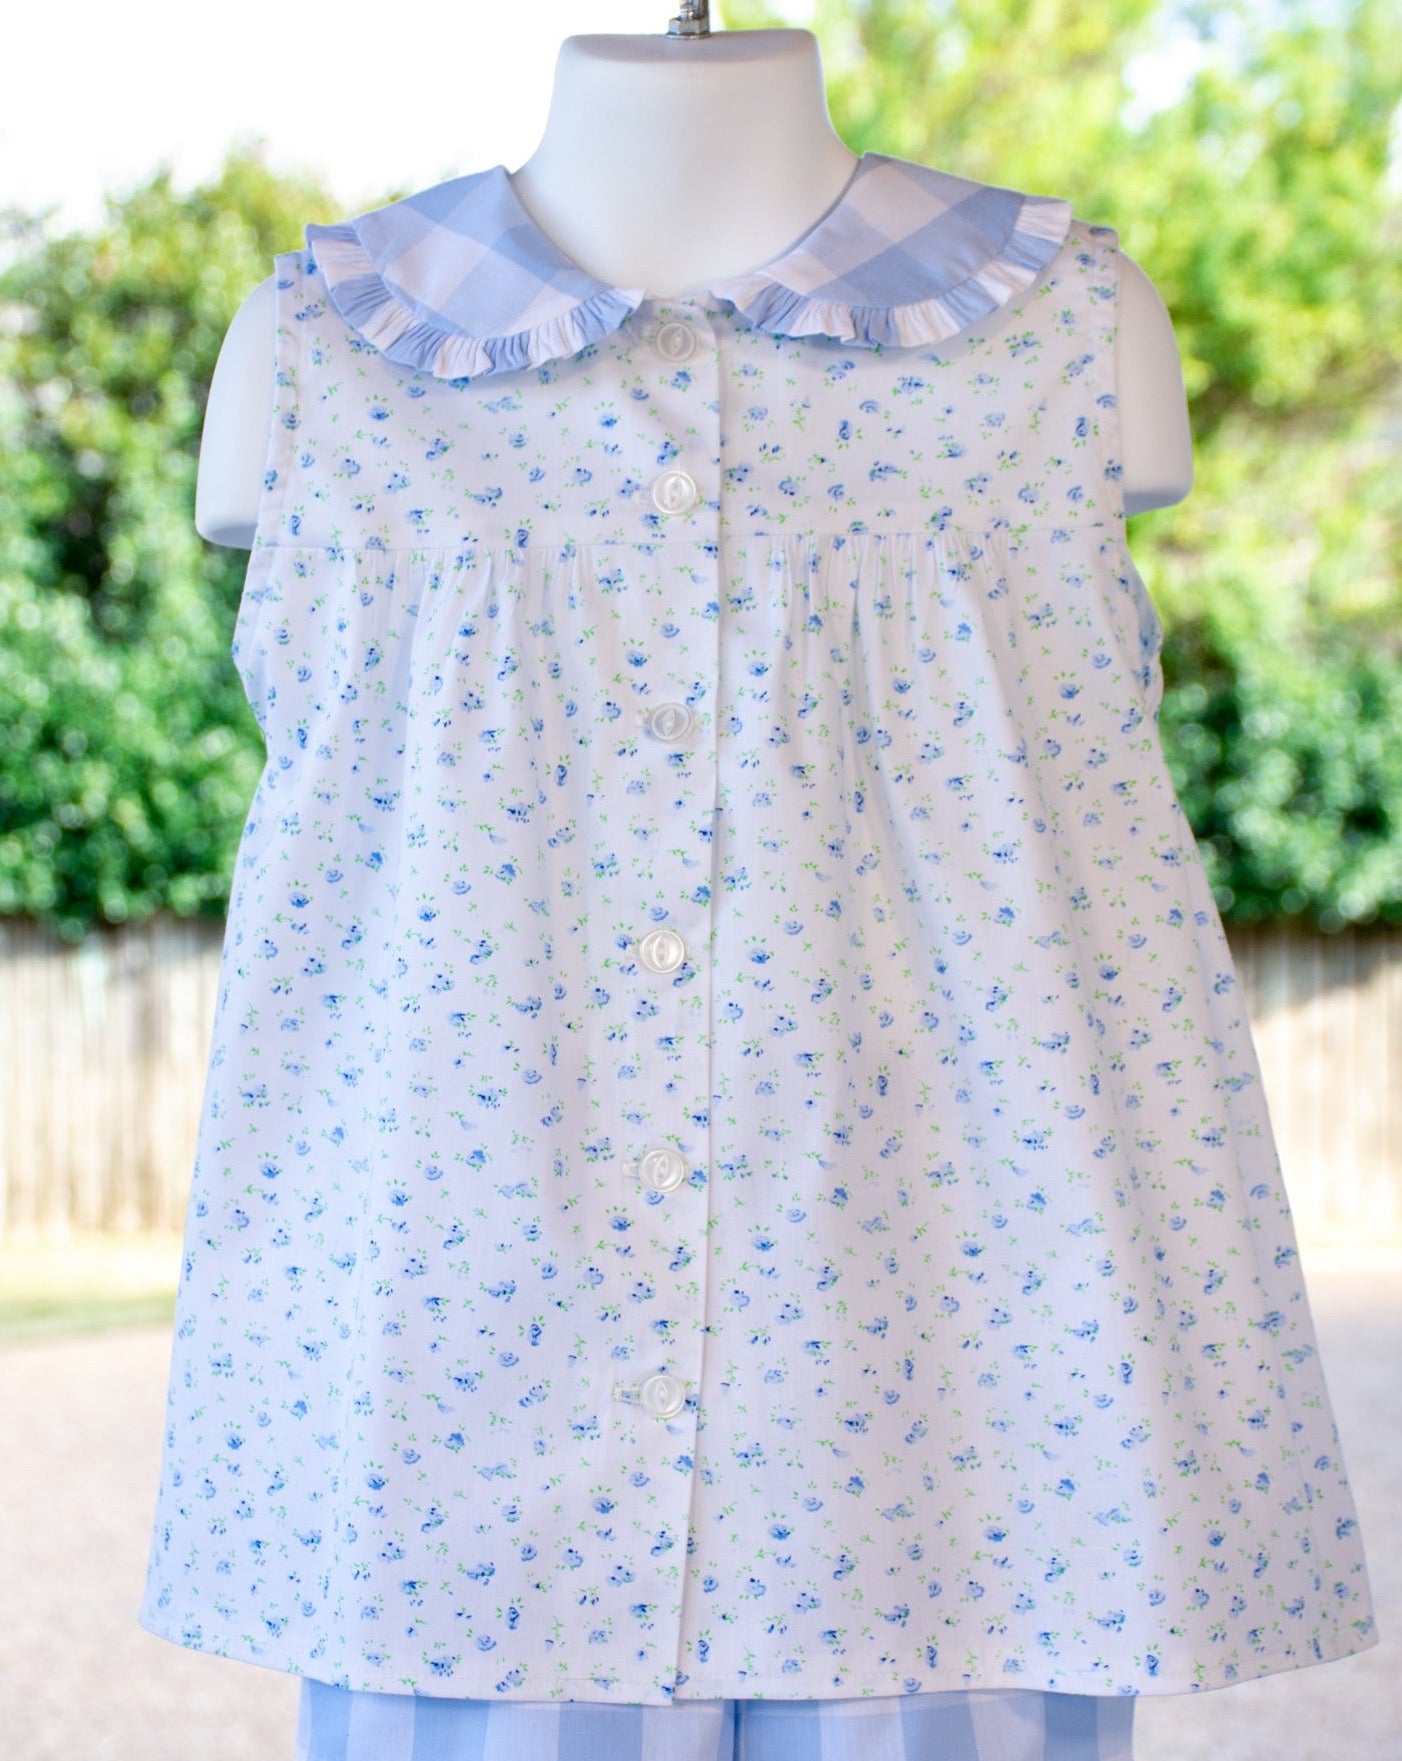 Floral Mary top - 5t